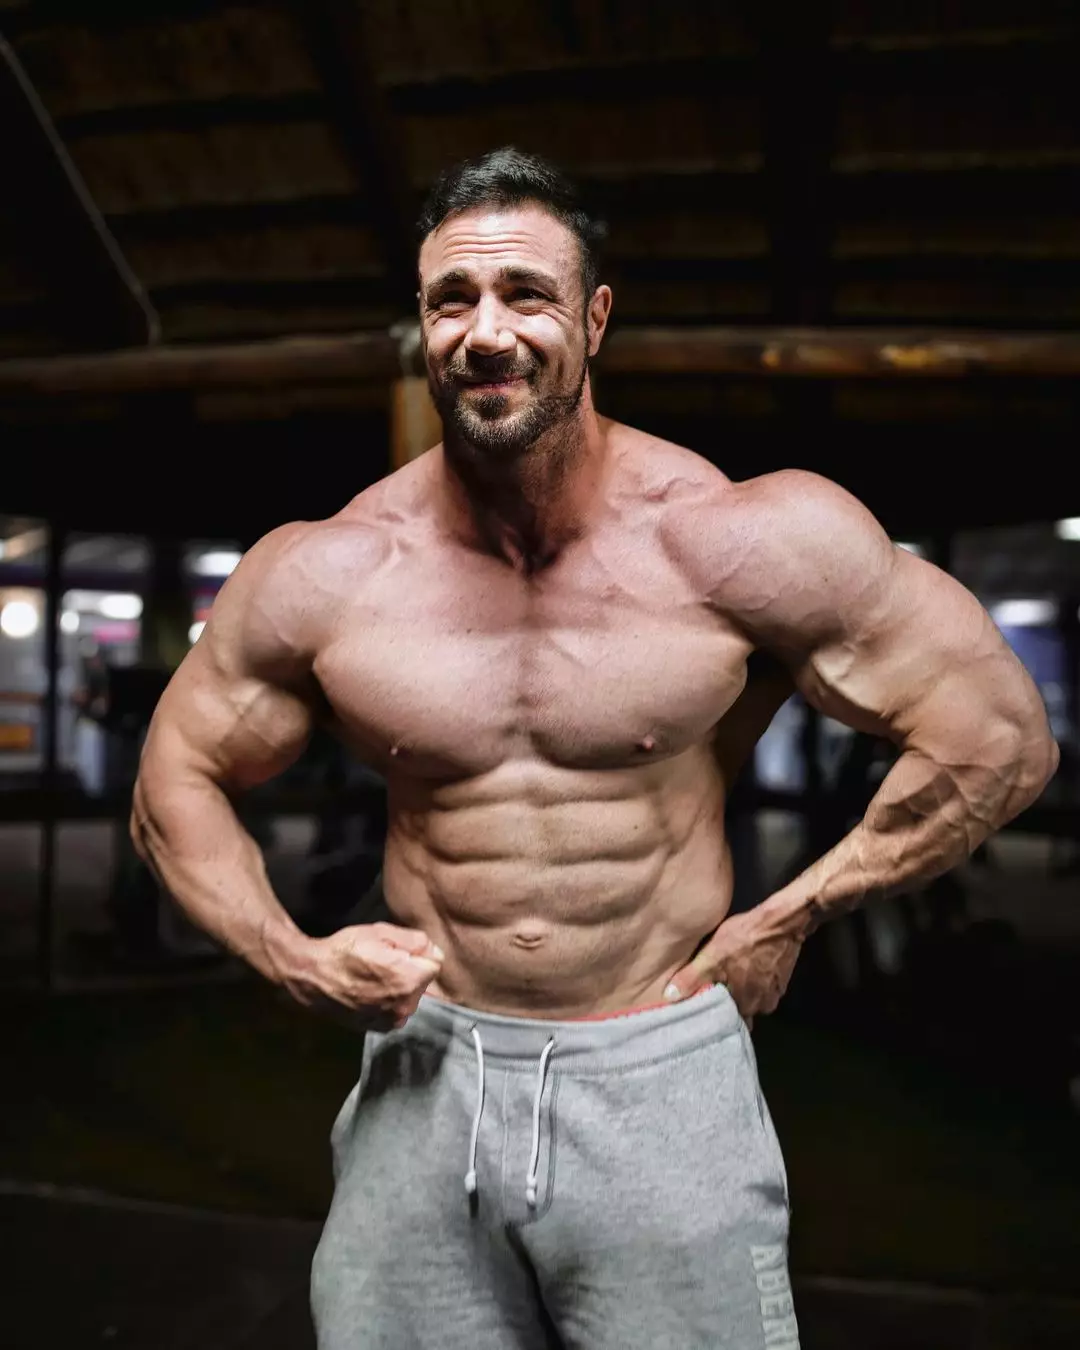 Noel is not a natural bodybuilder and wants other influencers to take more care with their followers' health.